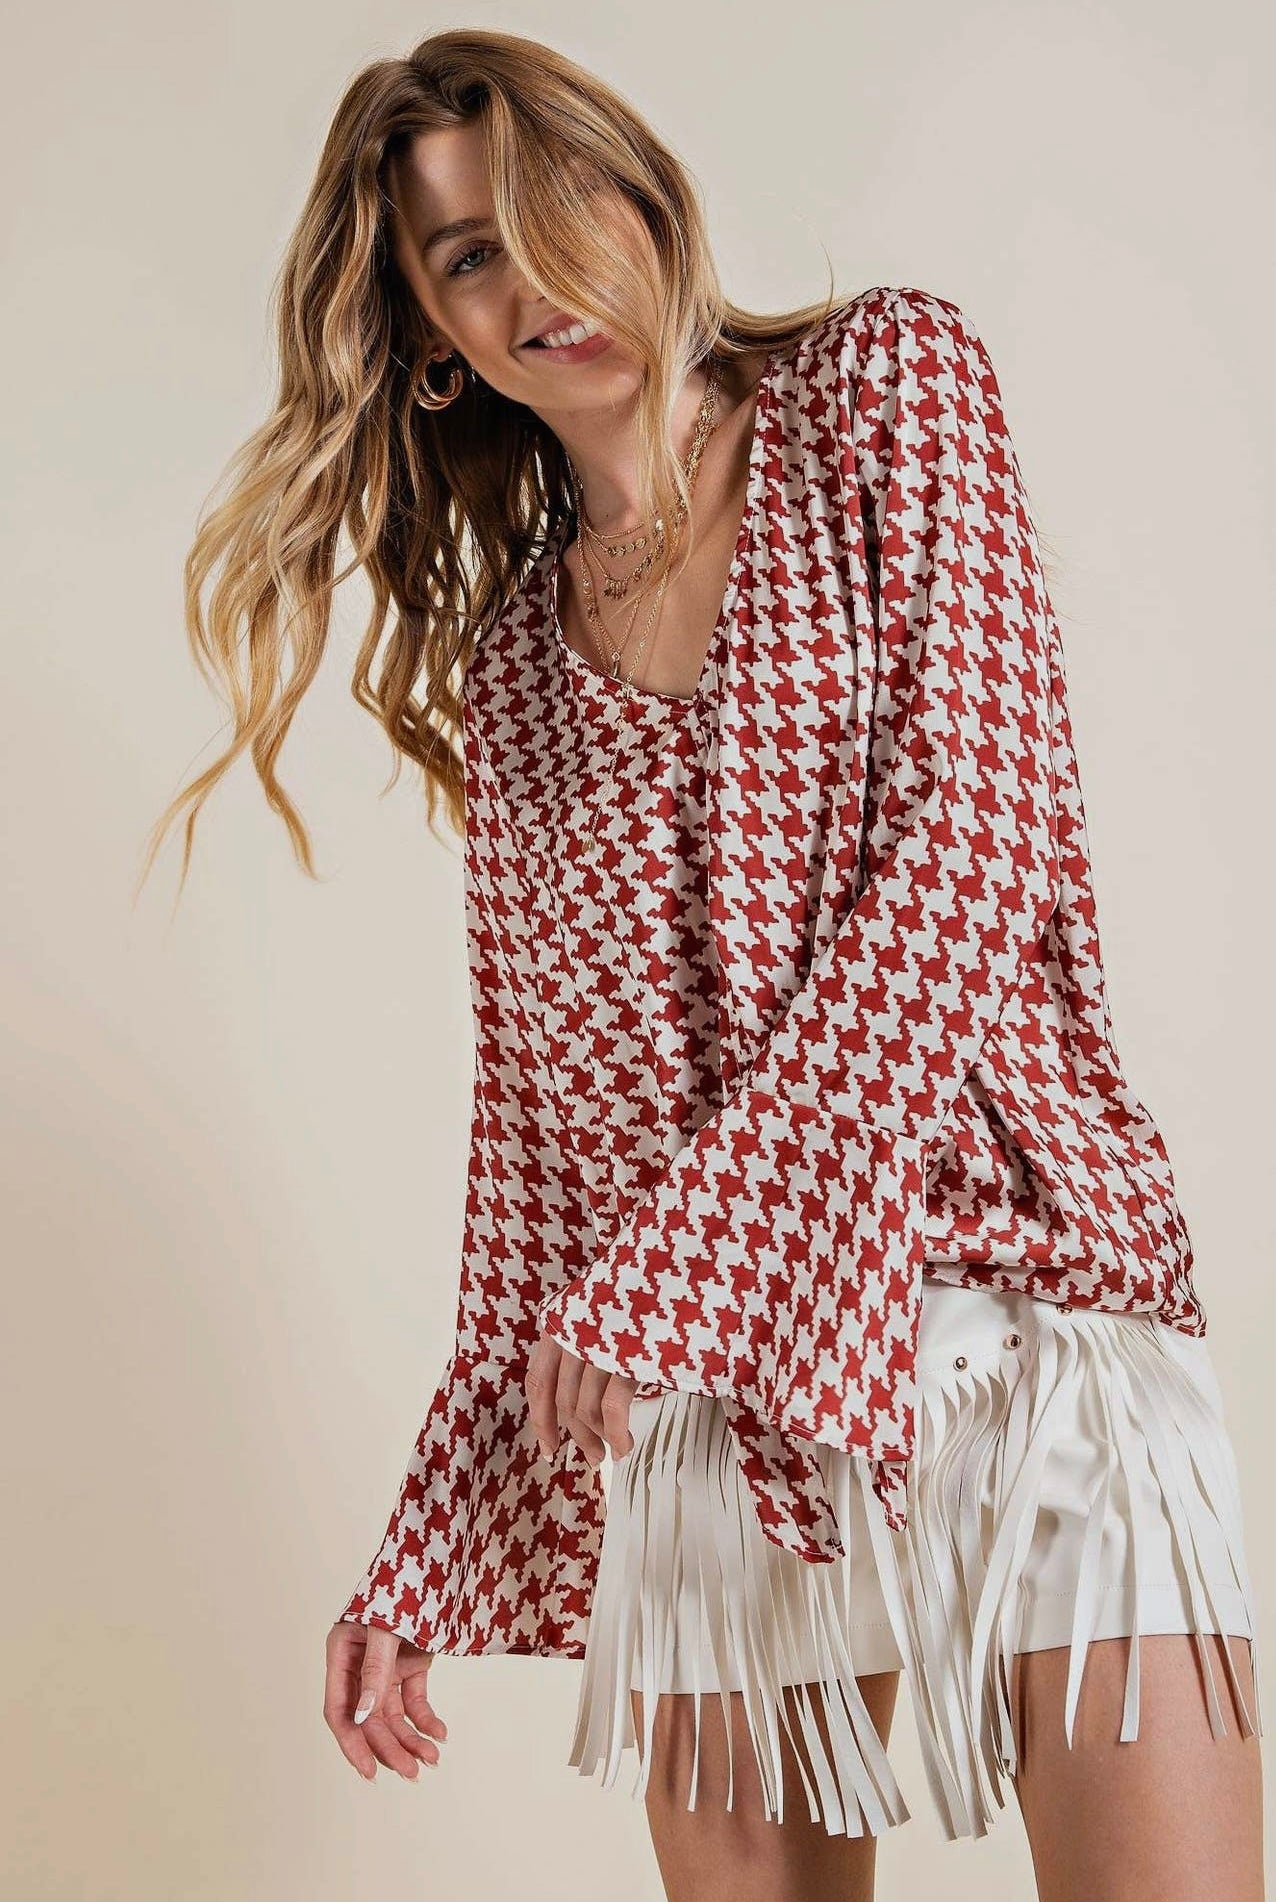 Bryant Houndstooth Top